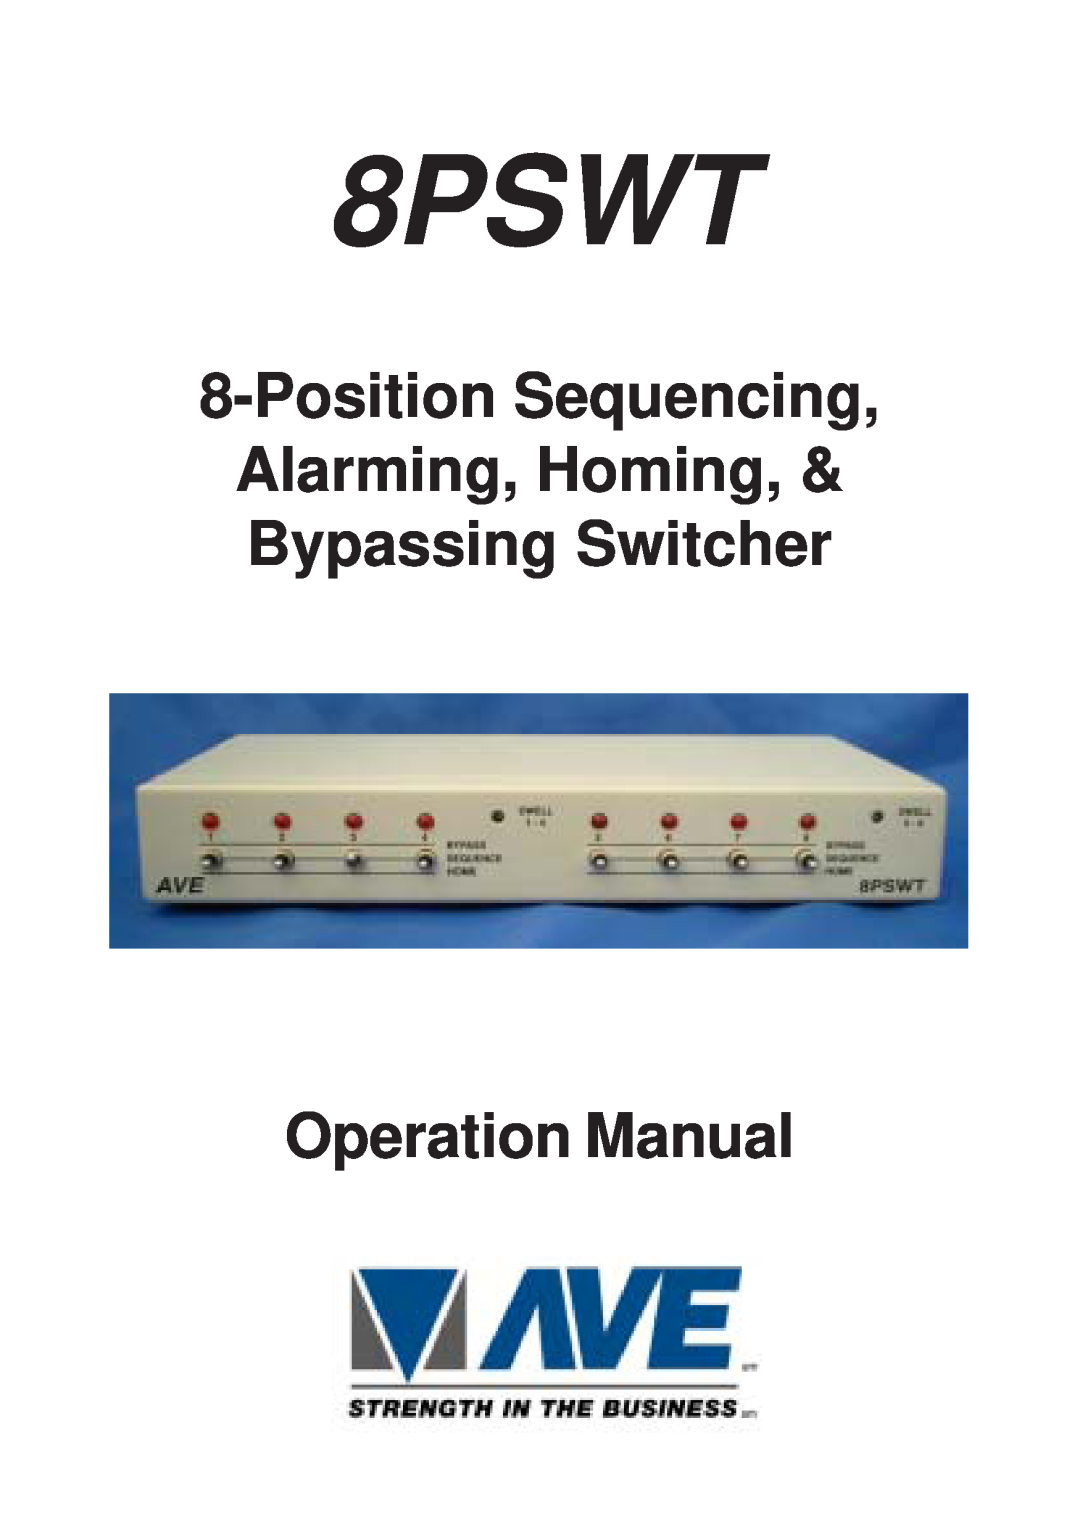 AVE 8PSWT operation manual Position Sequencing Alarming, Homing Bypassing Switcher, Operation Manual 